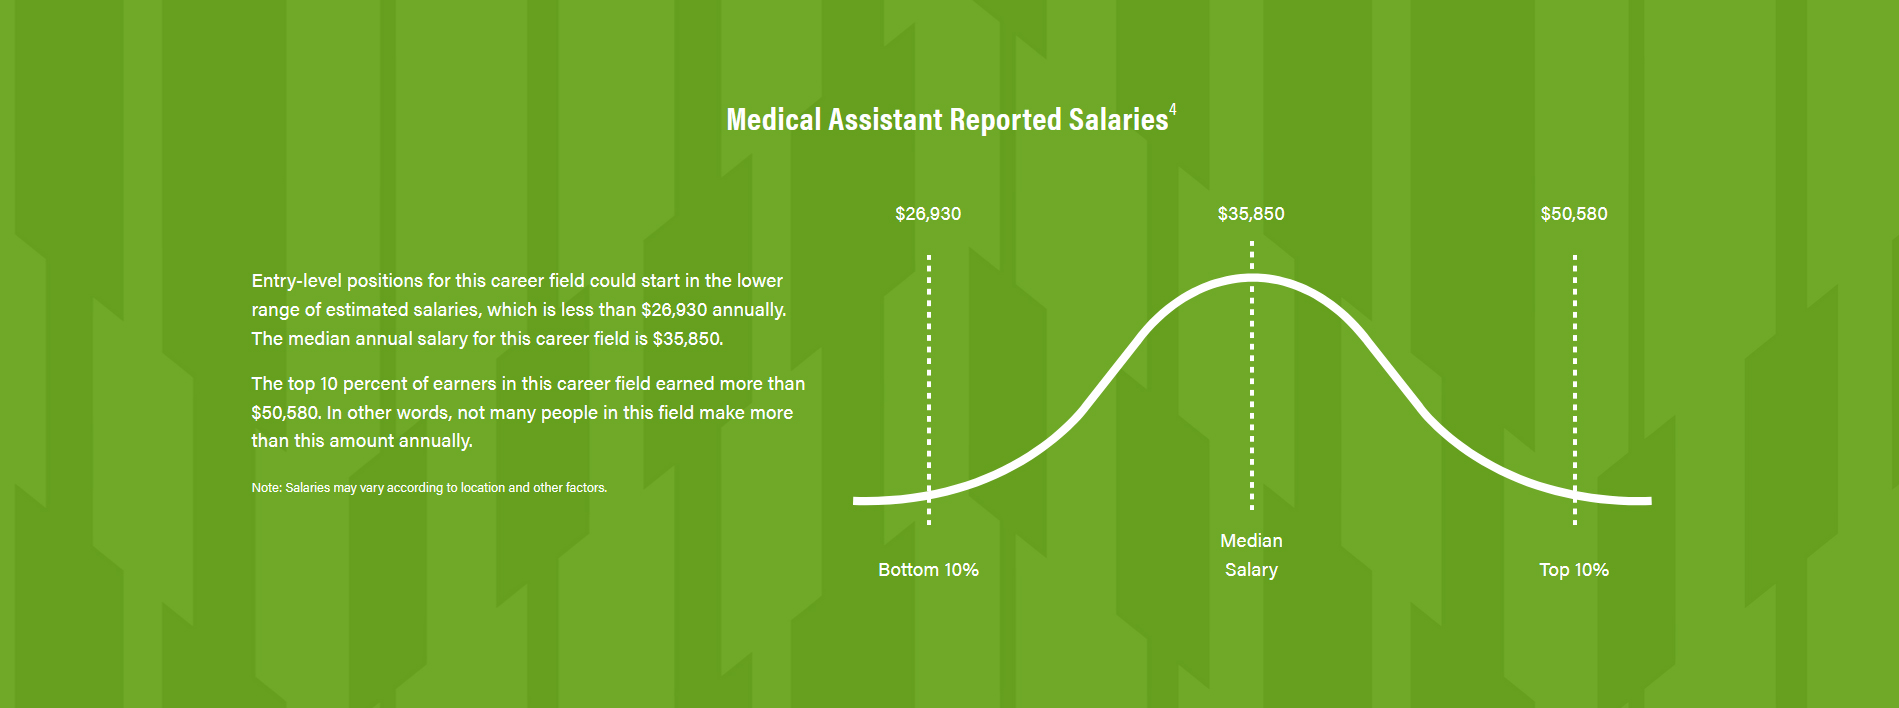 Medical Assistant Reported Salaries Chart